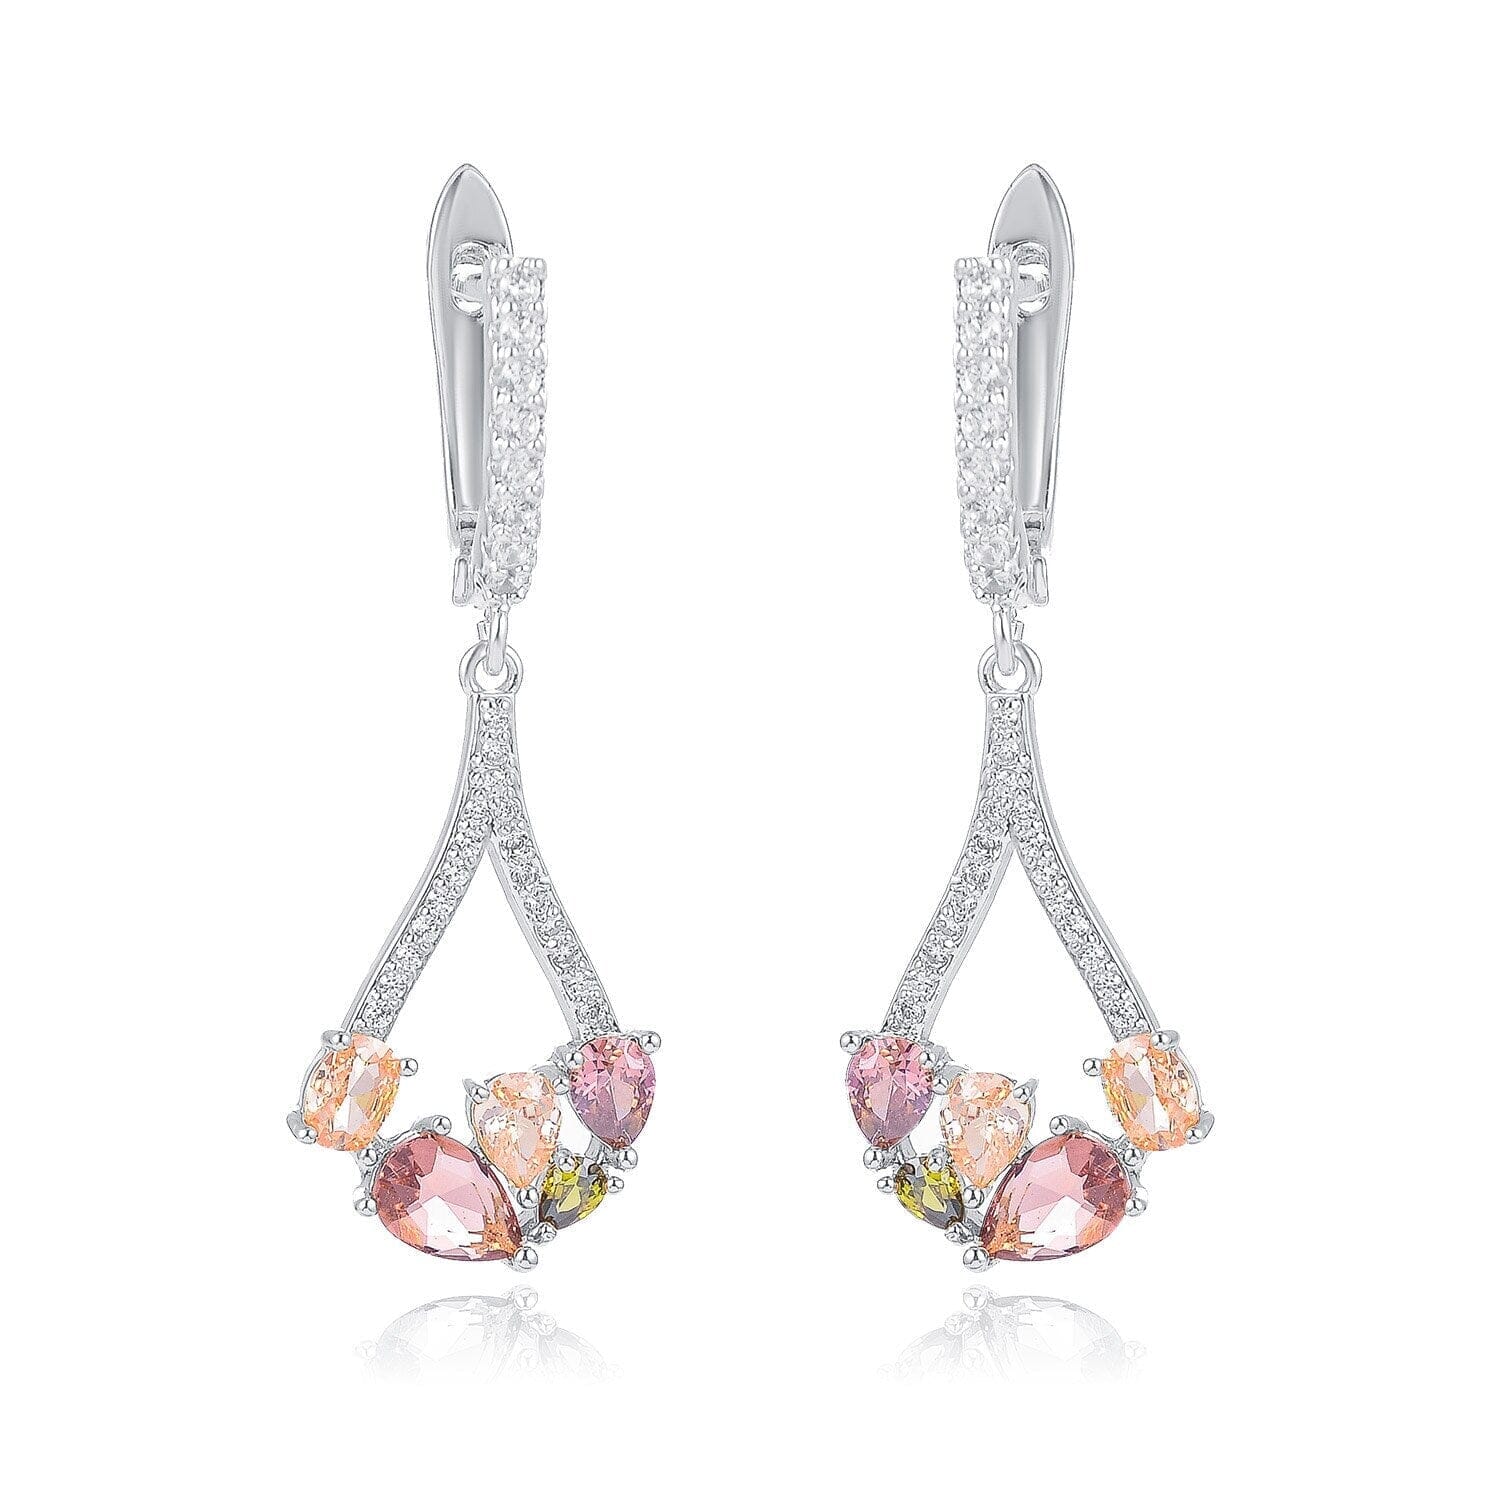 Compact And Exquisite Drop-Shaped Crystal EarringsEarringsSILVER2